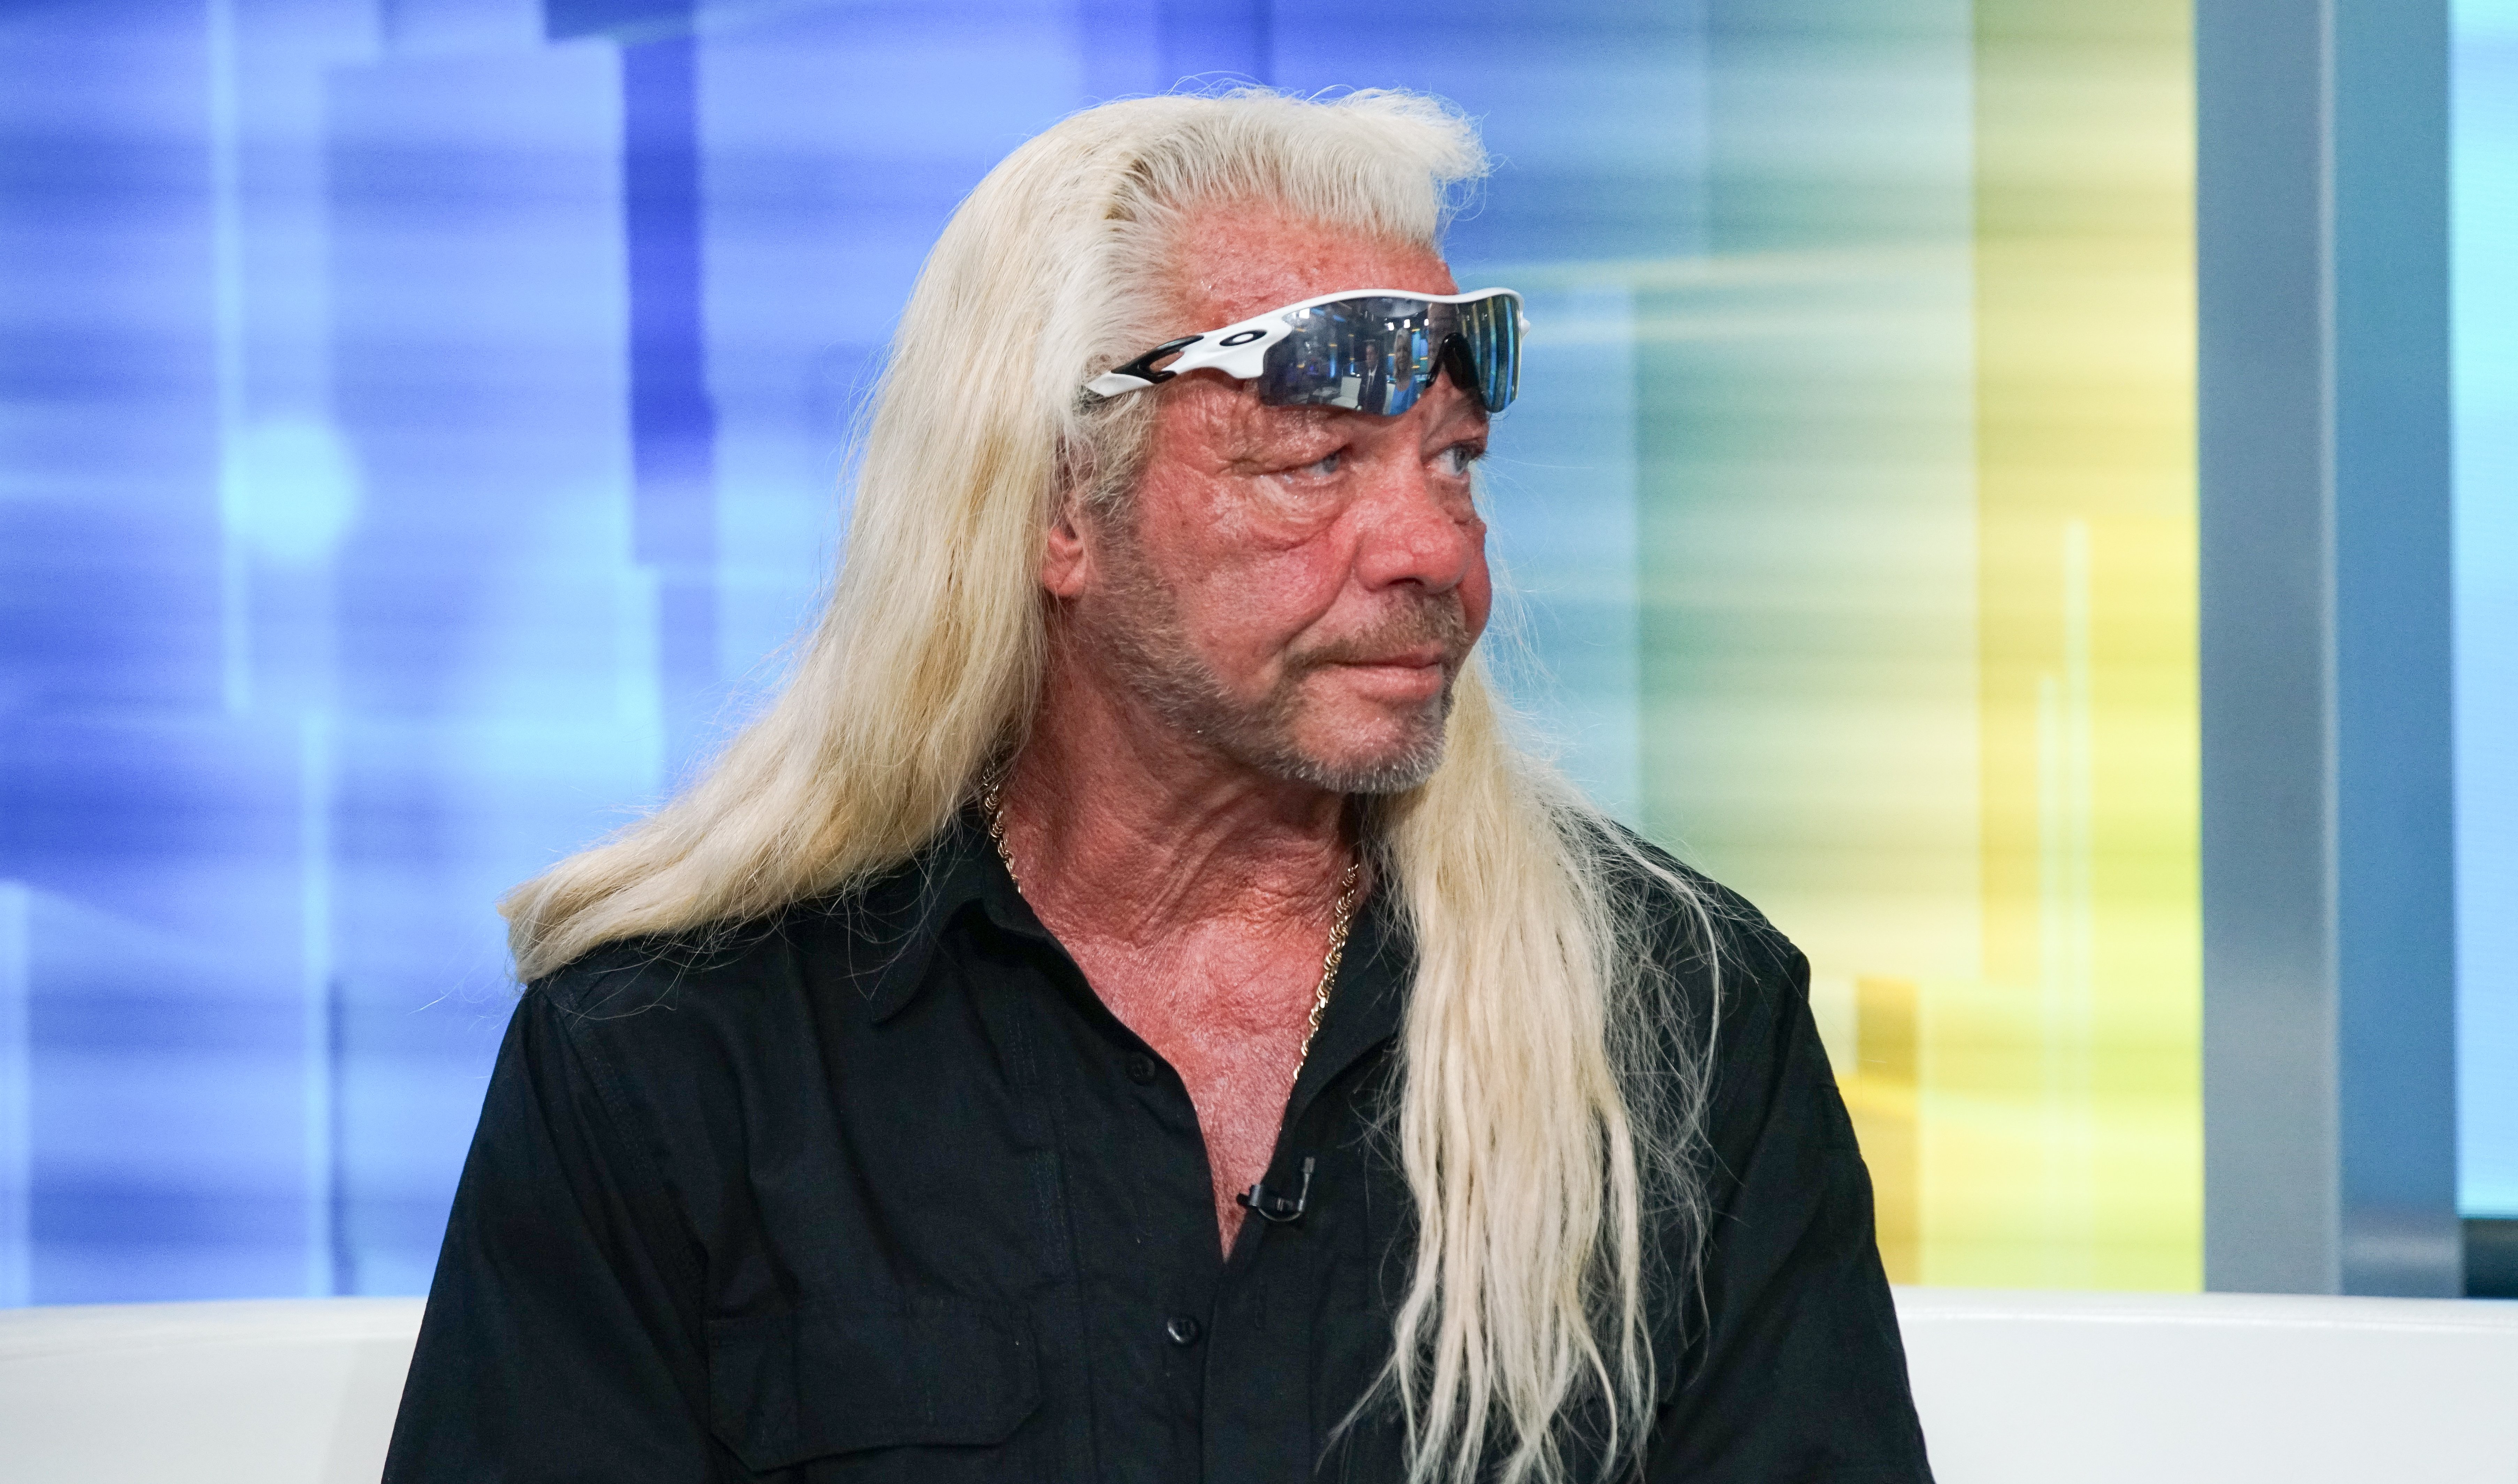 Duane Chapman visits "FOX & Friends" at FOX Studios on August 28, 2019 in New York City | Photo: Getty Images